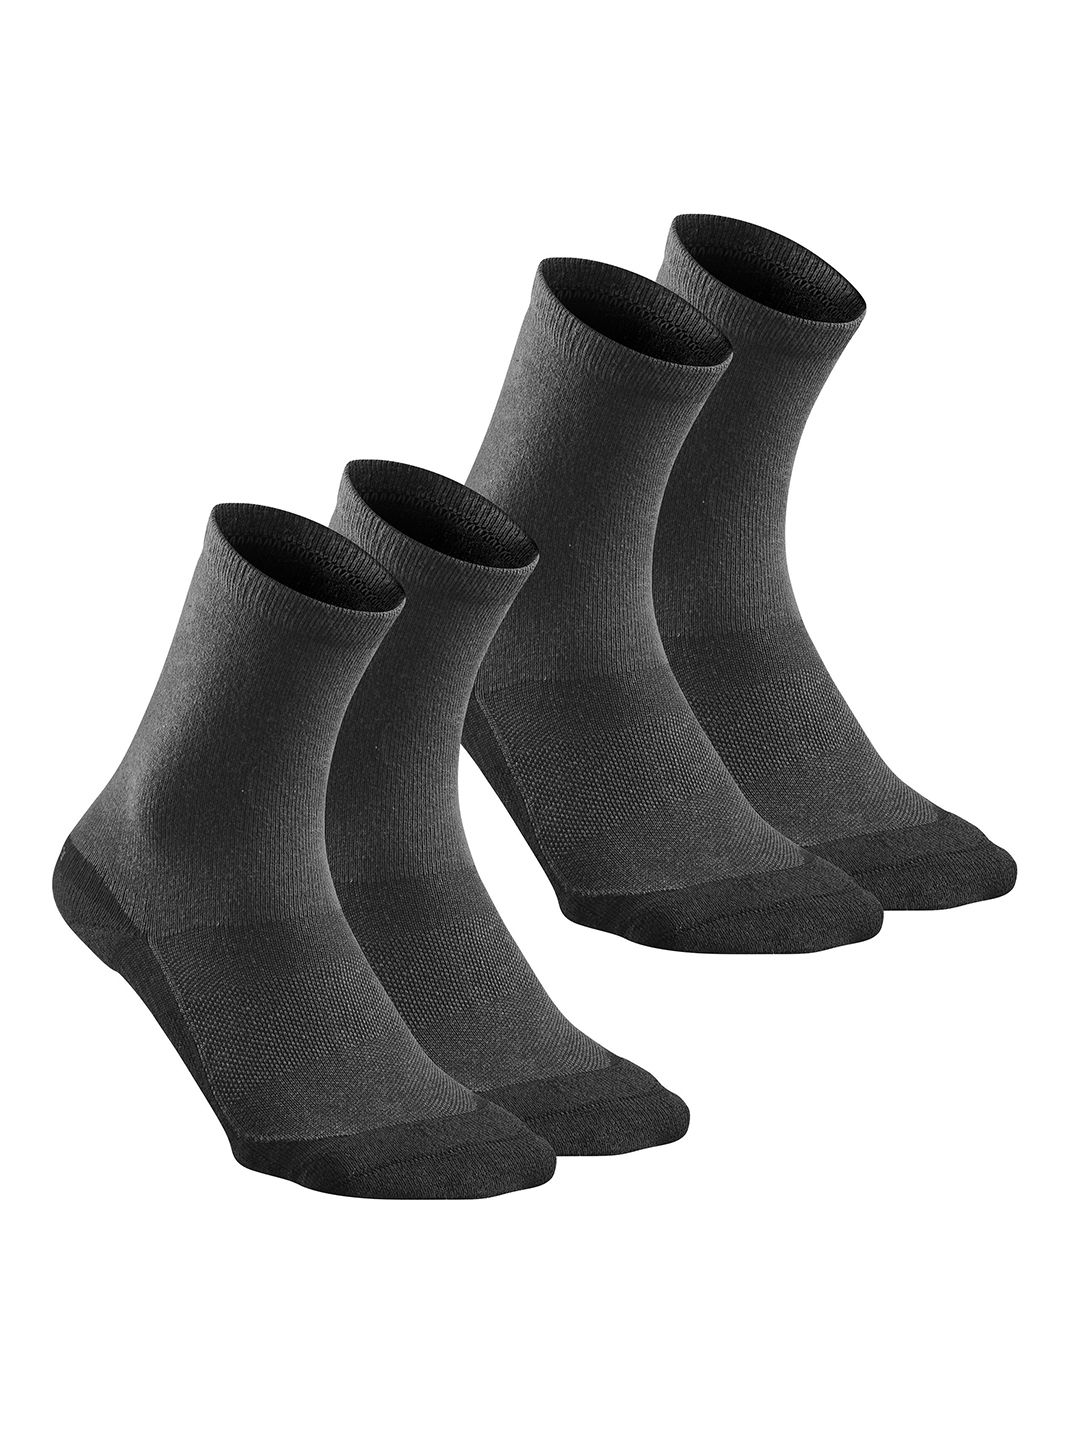 Quechua By Decathlon Pack of 2 Grey Hike Socks Price in India